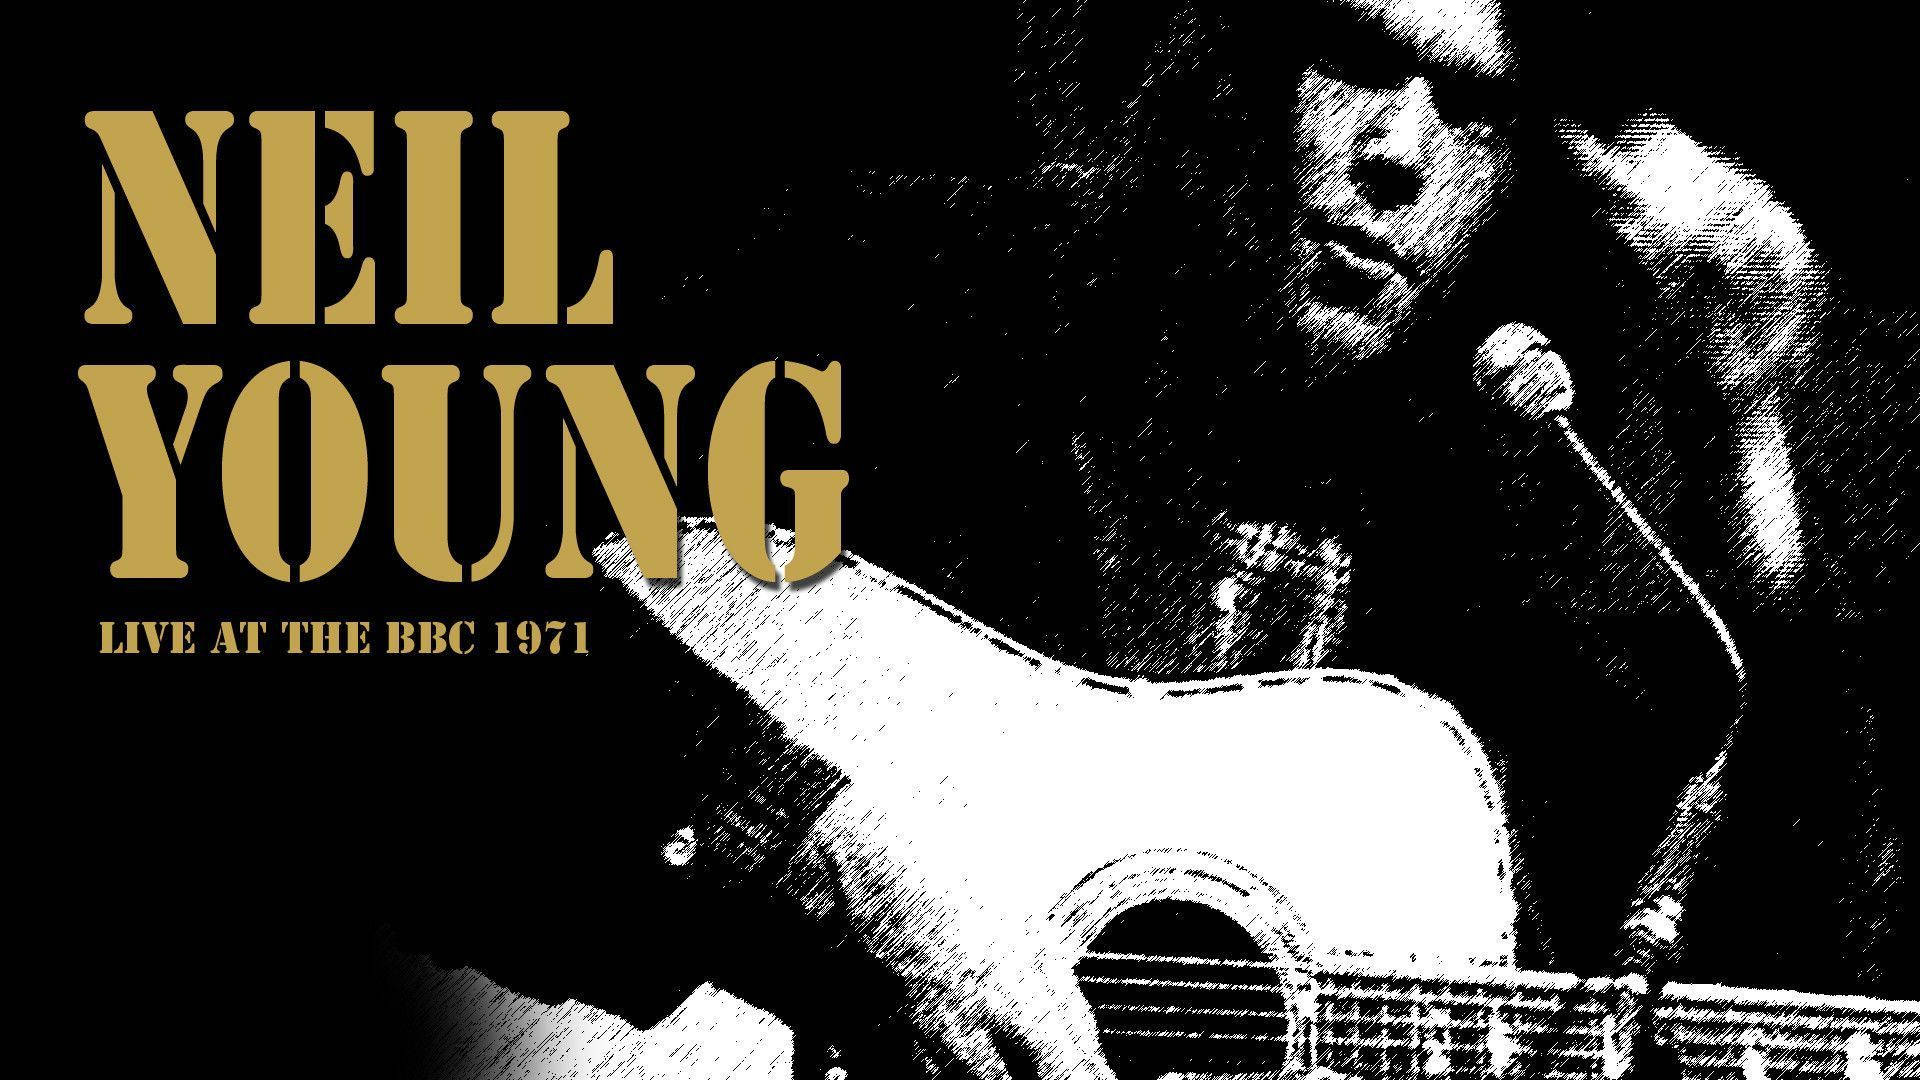 Neil Young Pictures Wallpaper